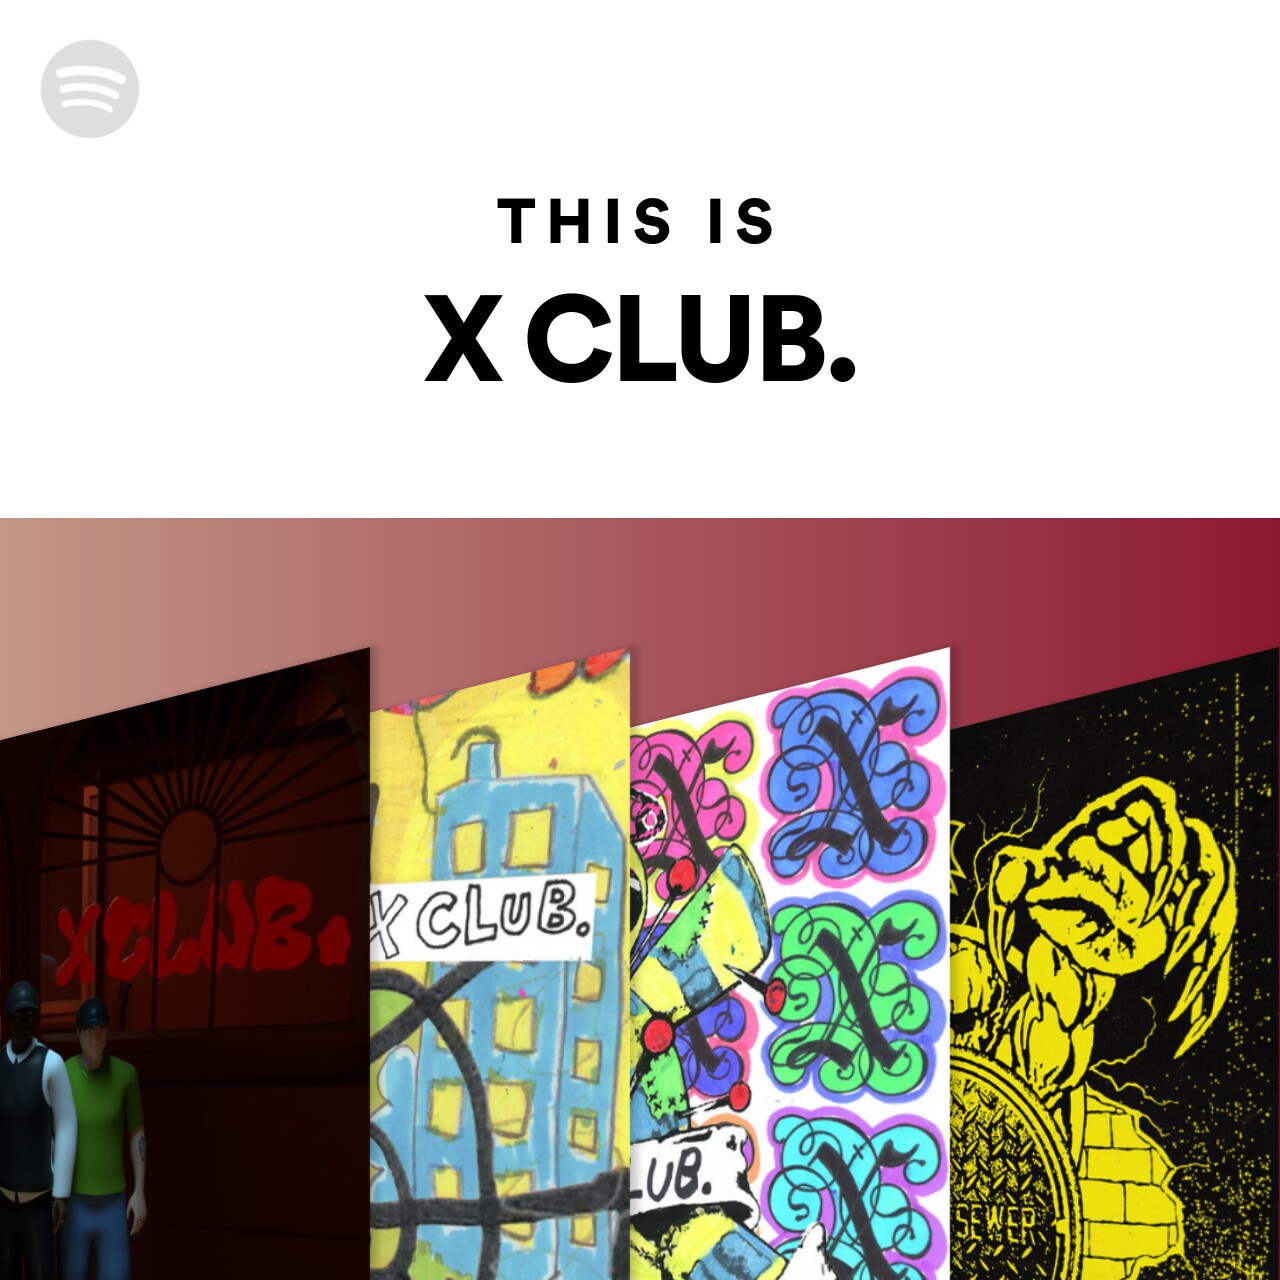 This Is X CLUB.